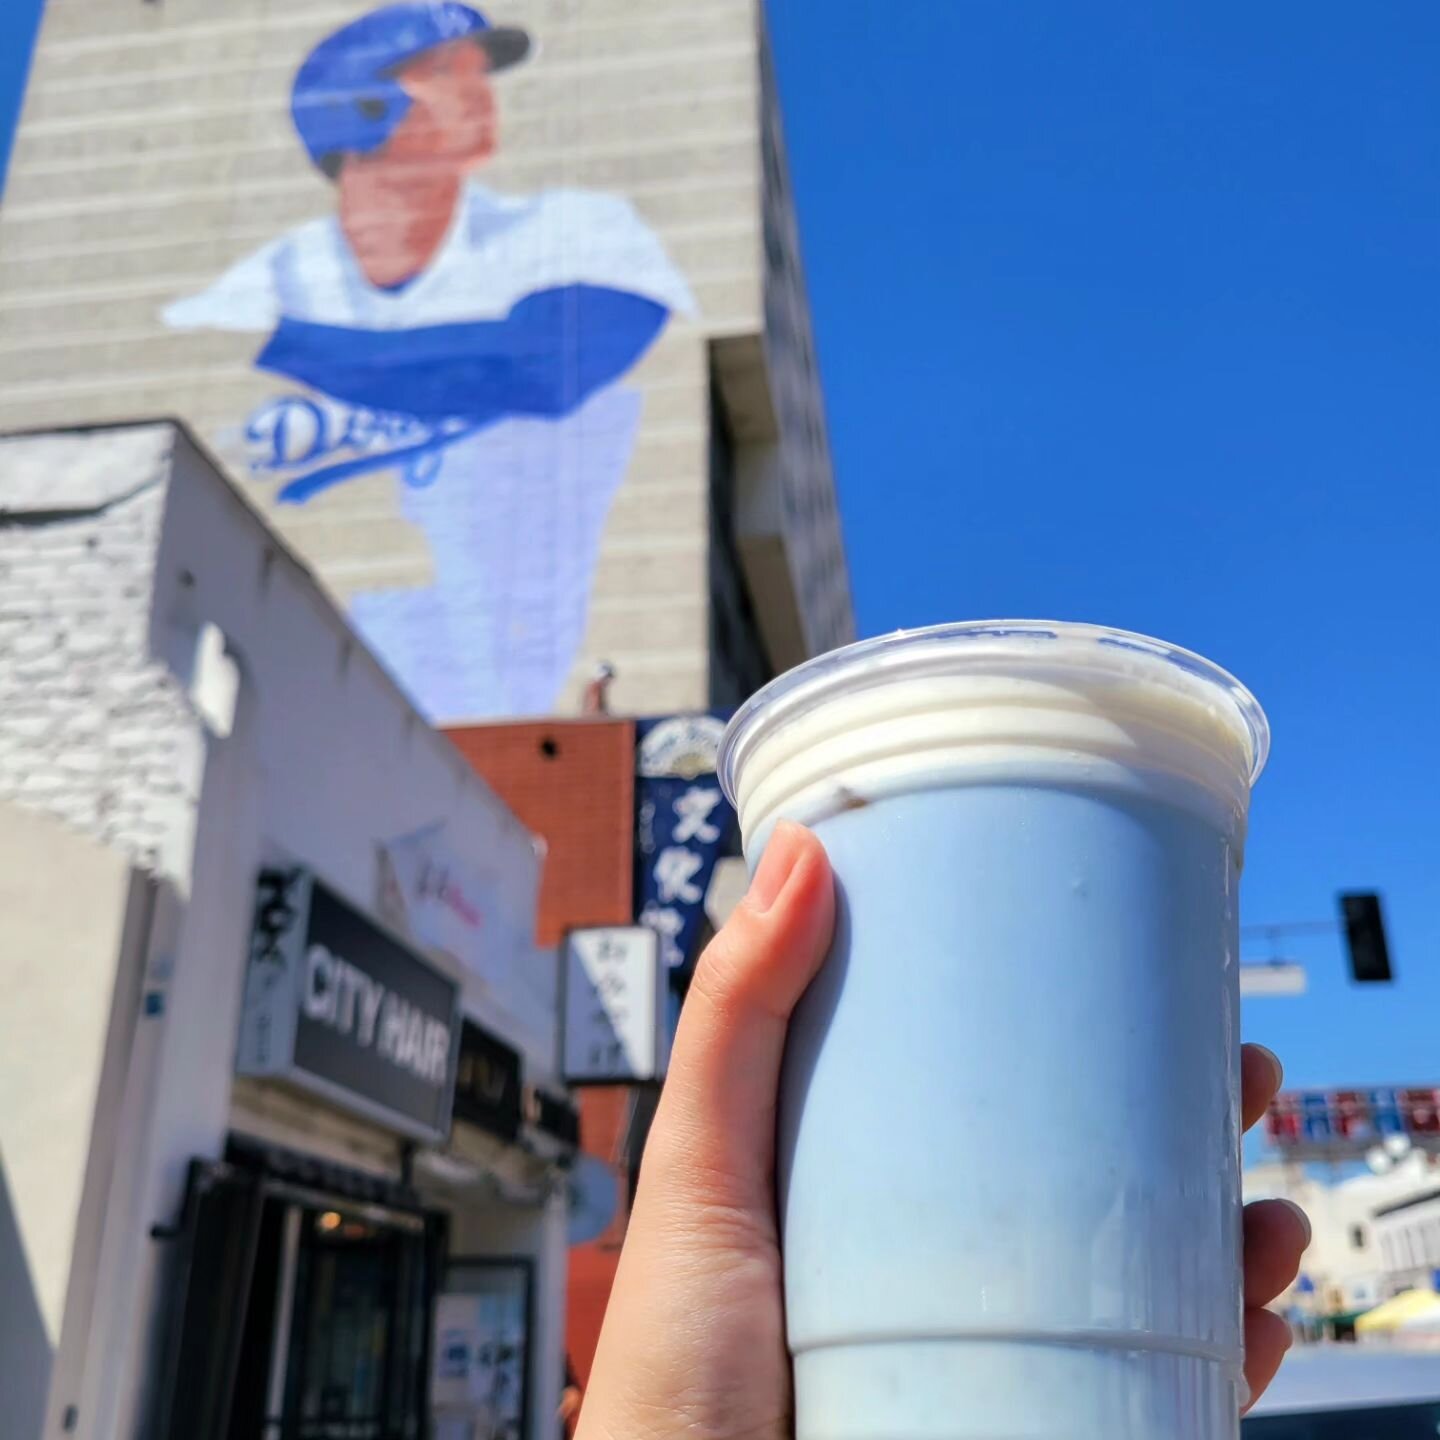 #LArising / Shohei Ohtani mural
Unveiling happening TODAY! MARCH 27th at 11am
Miyako Hotel
328 1st St, Los Angeles, CA 90012
In the heart of #LittleTokyo
.
#LA city pride will be in full effect this Wednesday. Don't forget to wear your your @dodgers 